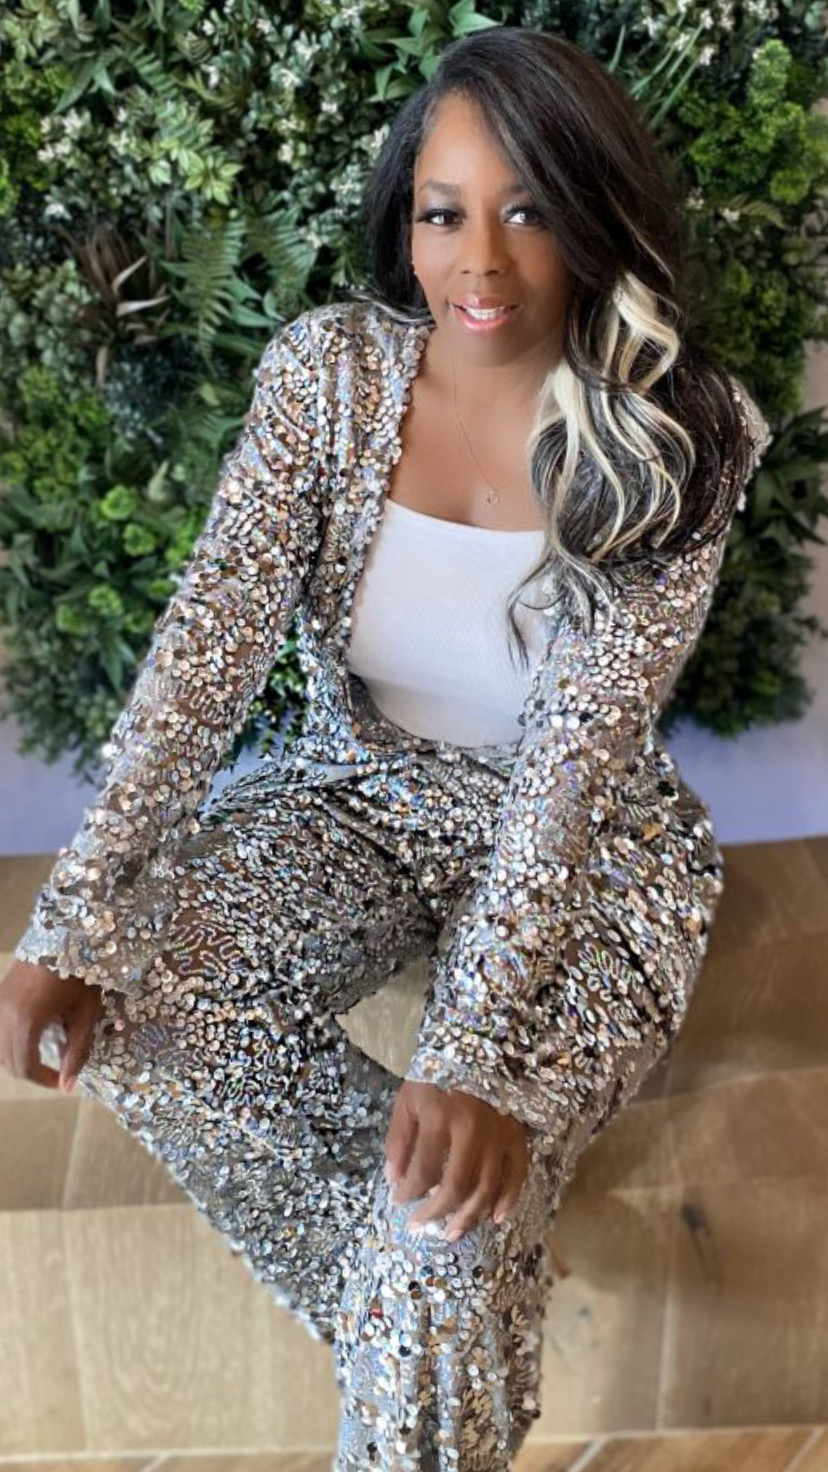 My Style: Formal Sequins Pant Suit